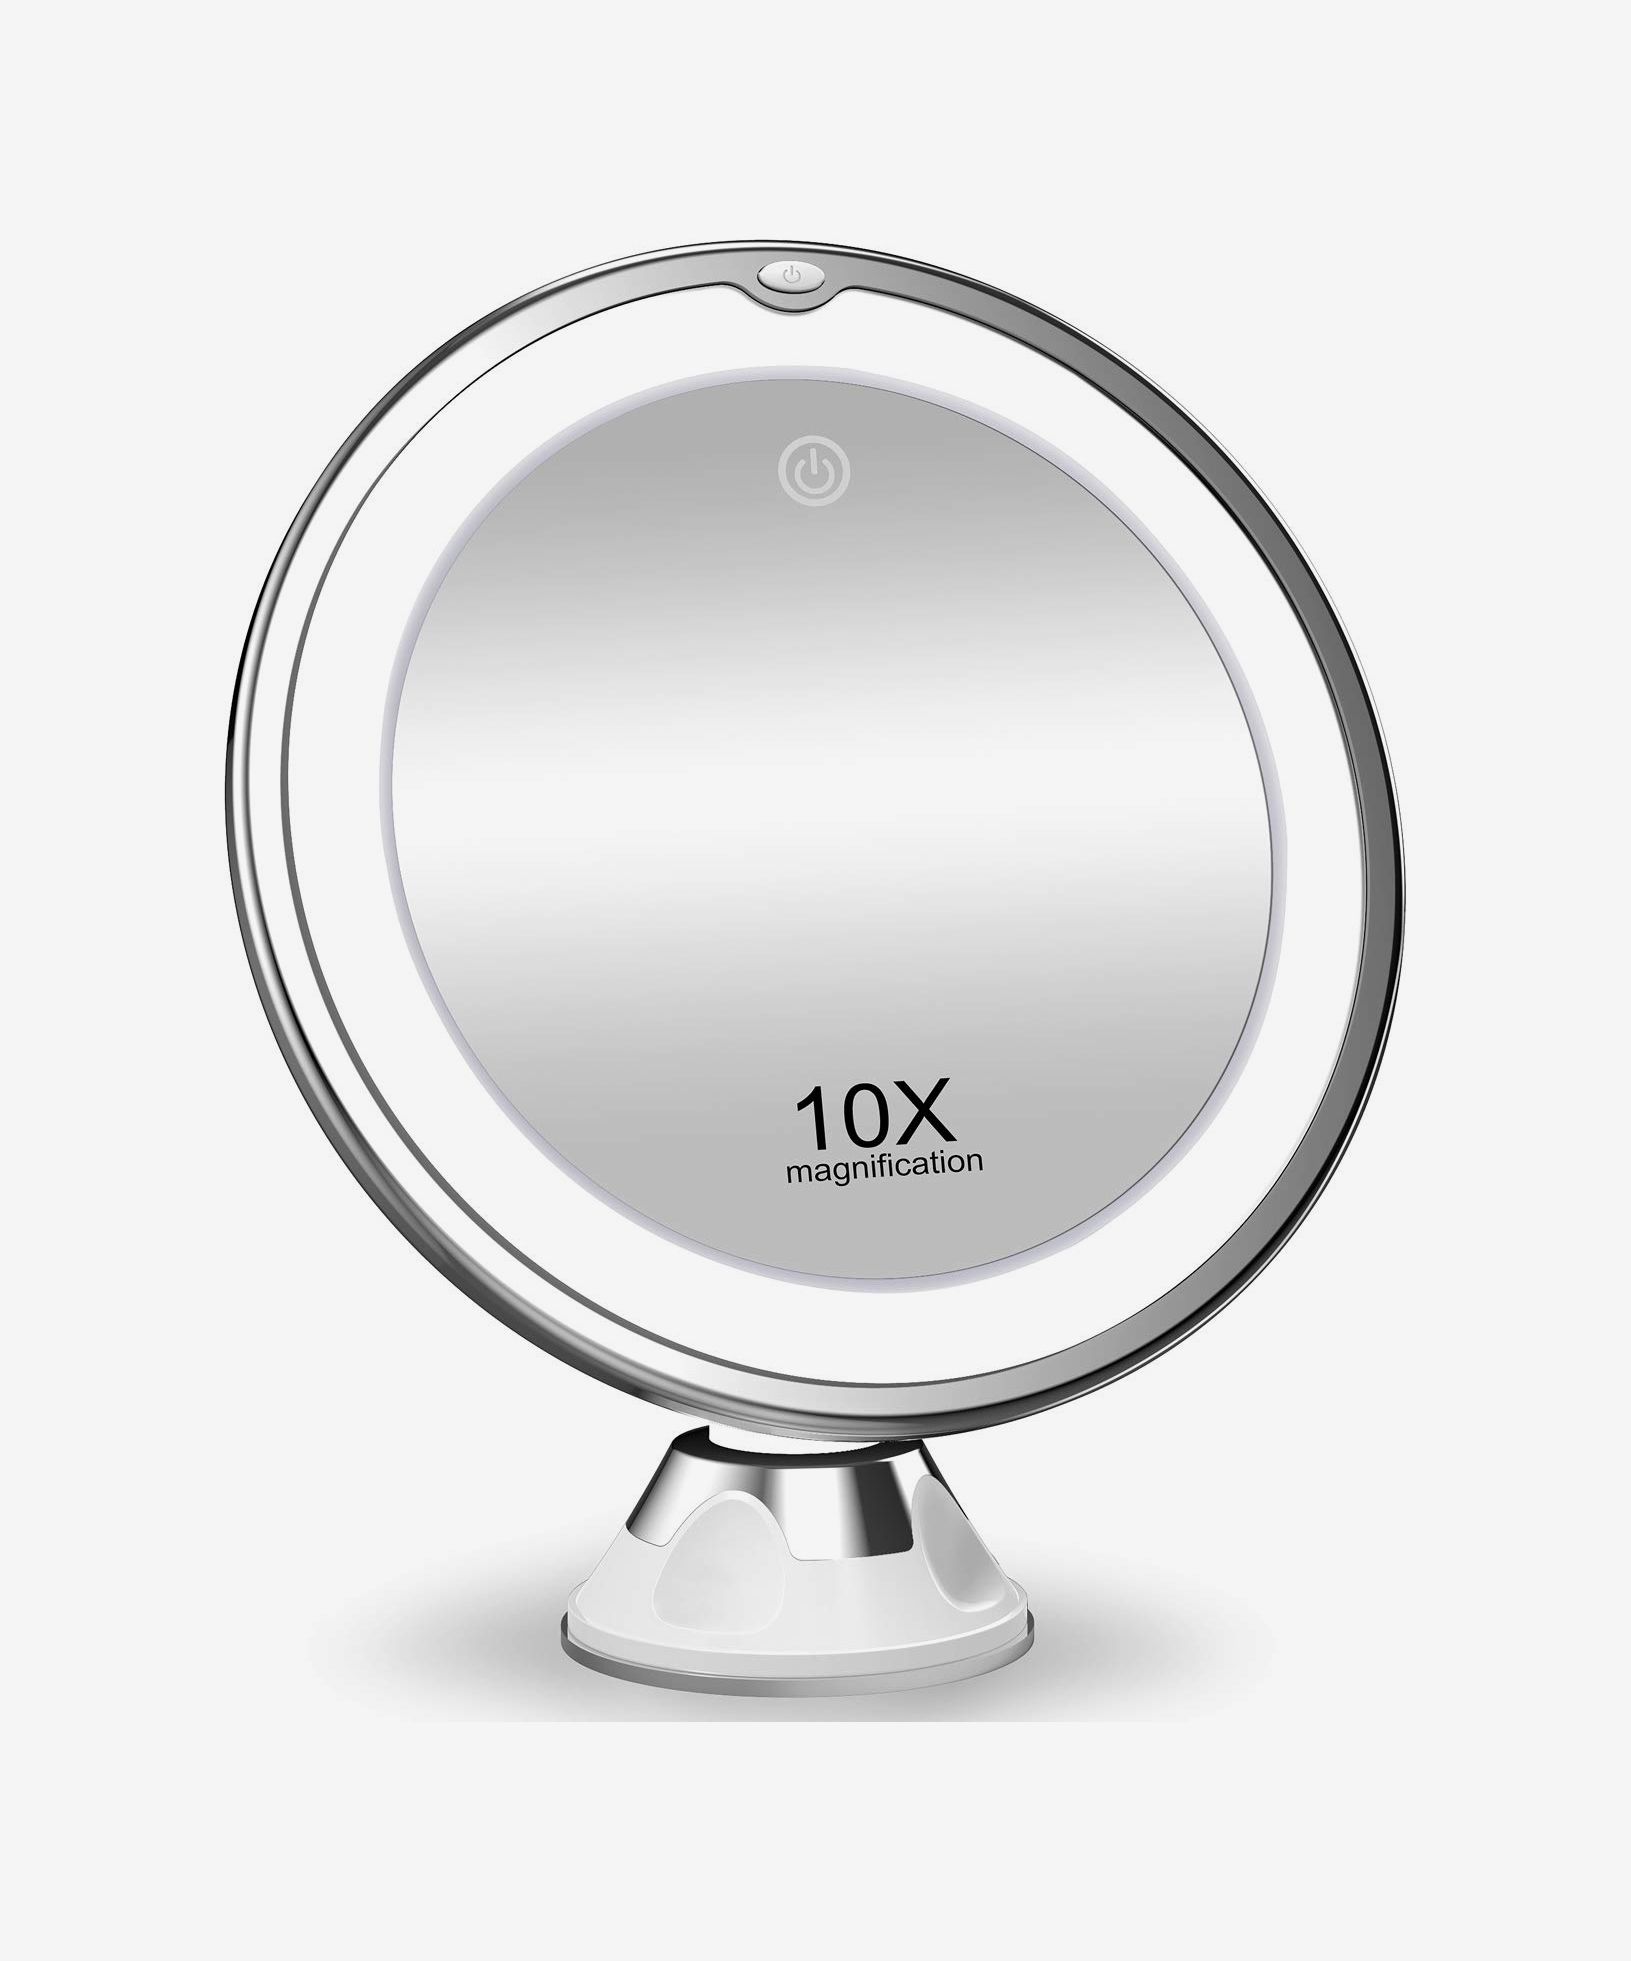 14 Best Lighted Makeup Mirrors 2021, Best Led Makeup Mirror 2021